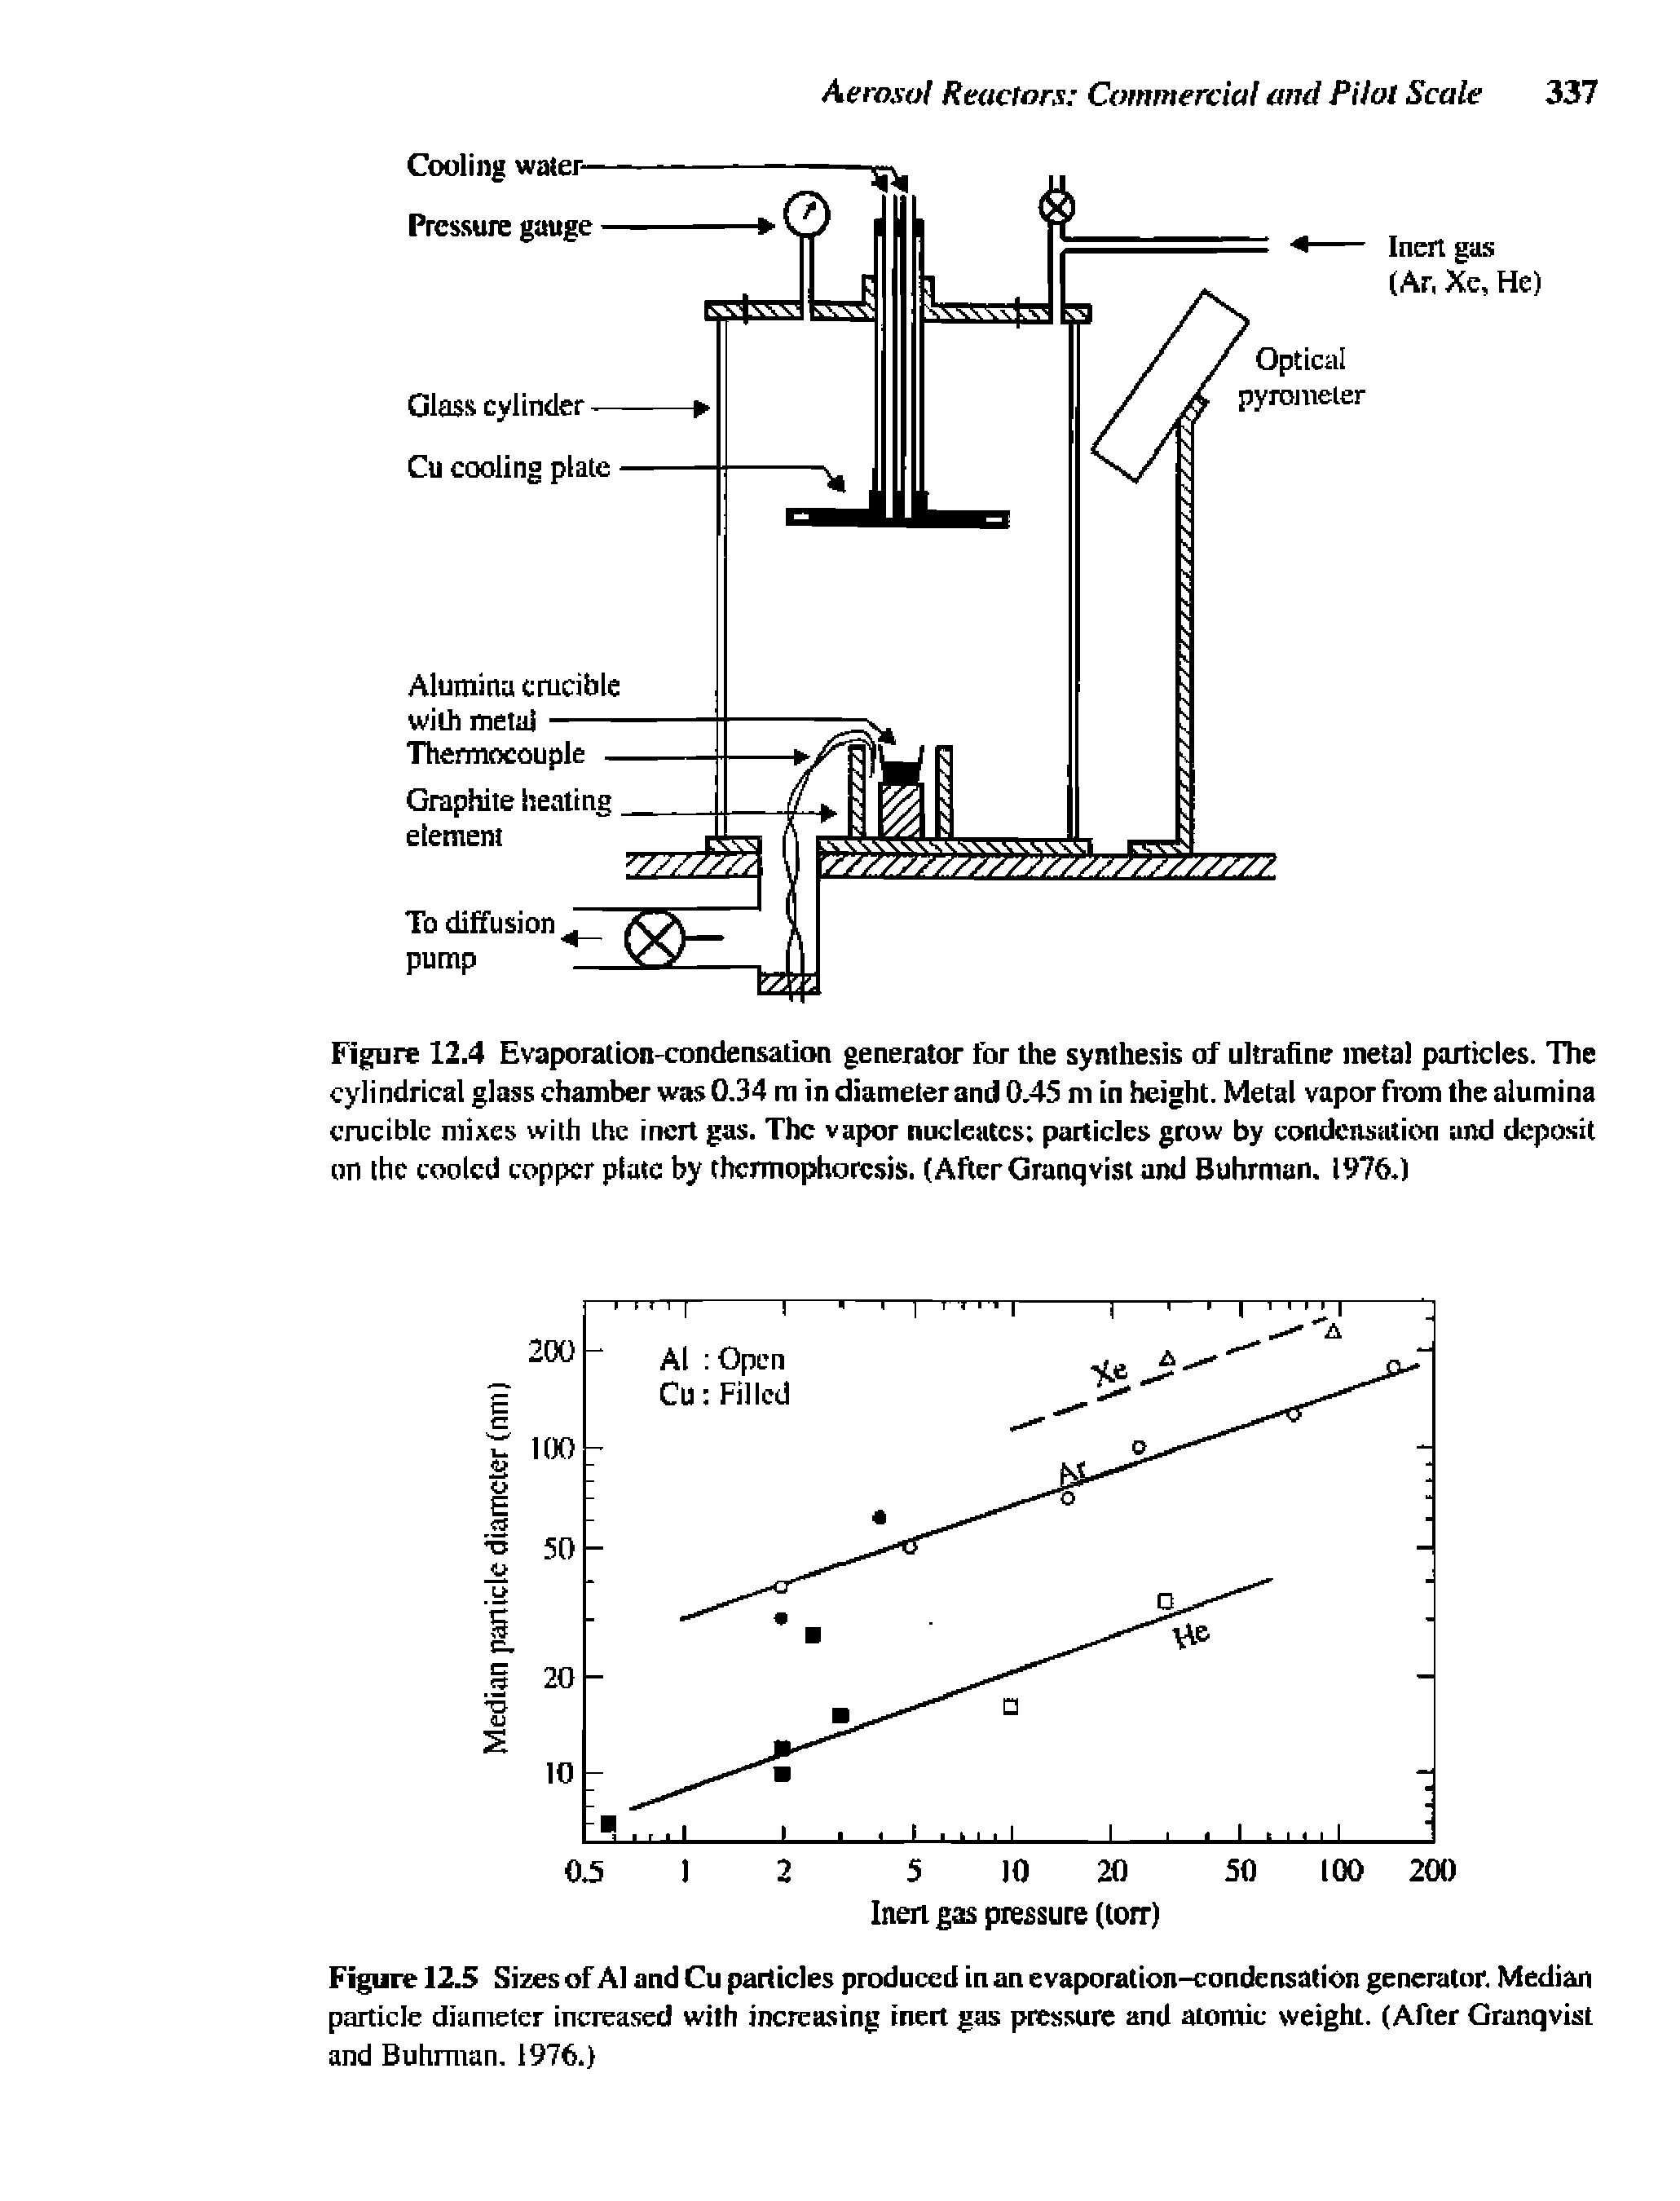 Figure 12.4 Evaporation-condensation generator for the synthesis of ultrafine metal particles. The cylindrical glass chamber was 0.34 m in diameter and 0.45 m in height. Metal vapor from the alumina crucible mixes with the inert gas. The vapor nucleates particles grow by condensation and deposit on the cooled copper plate by thcrmophorcsis. (After Granqvisi and Buhrman. 1976.)...